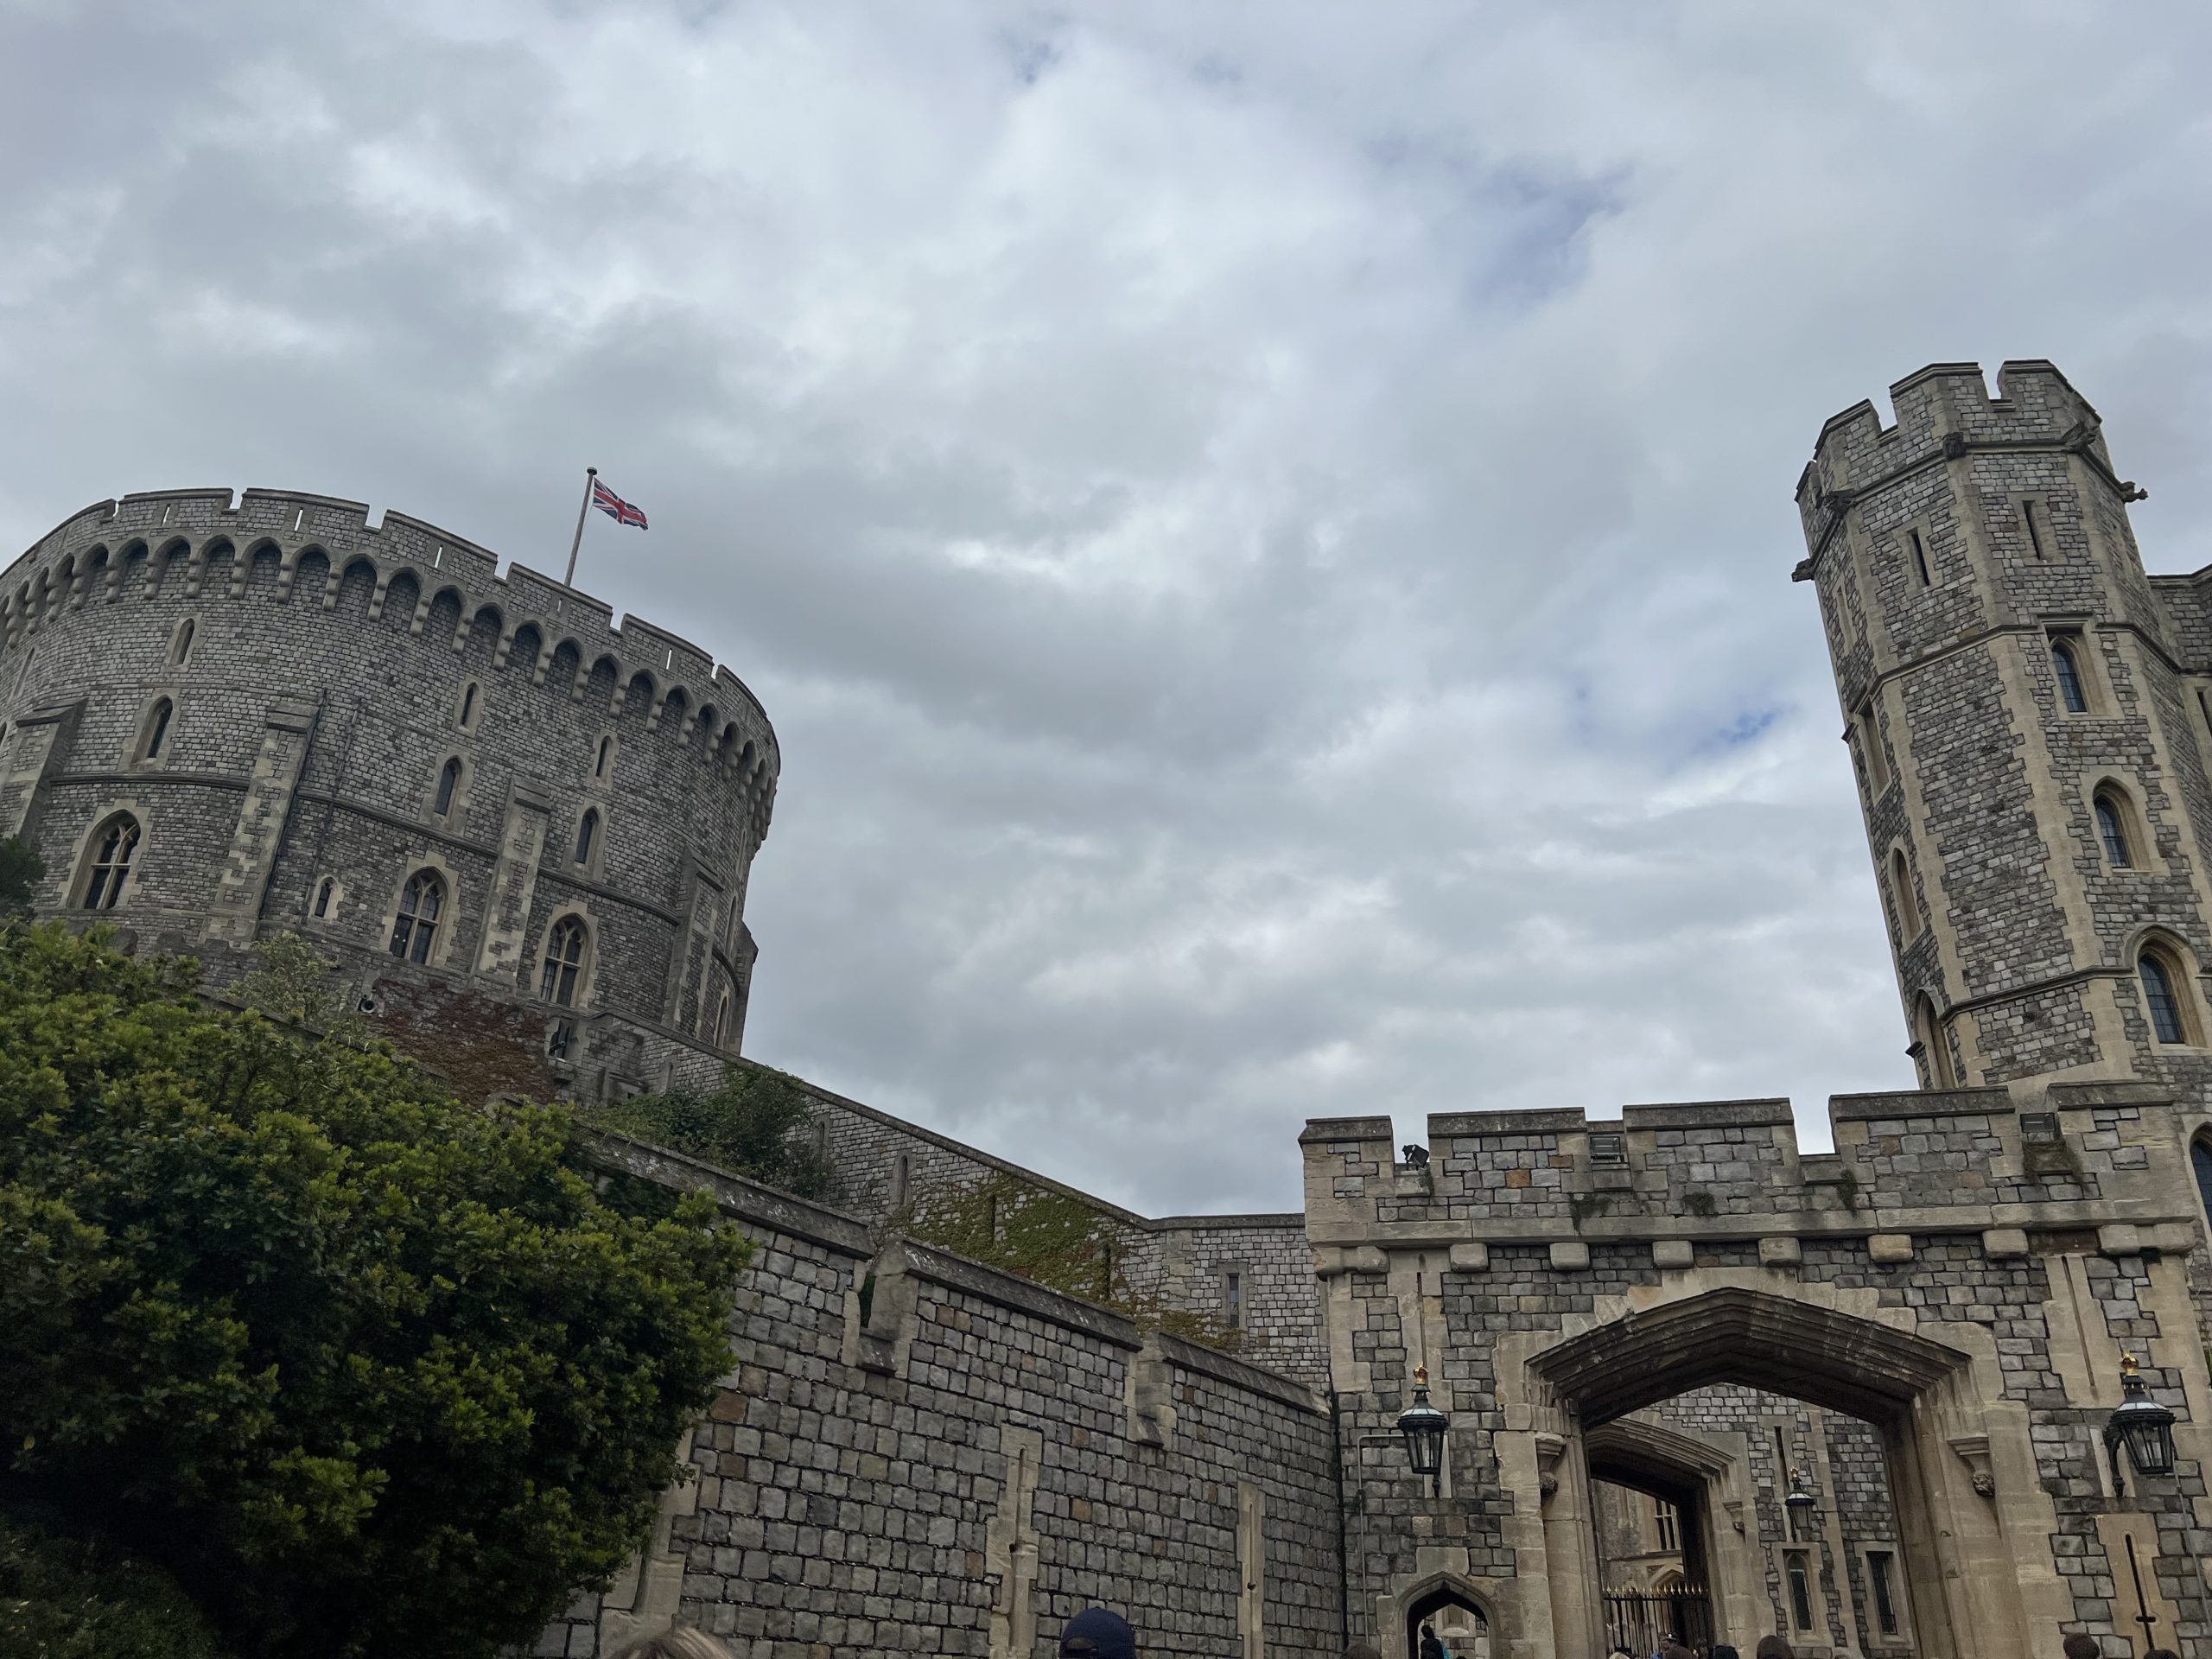 A day a Windsor